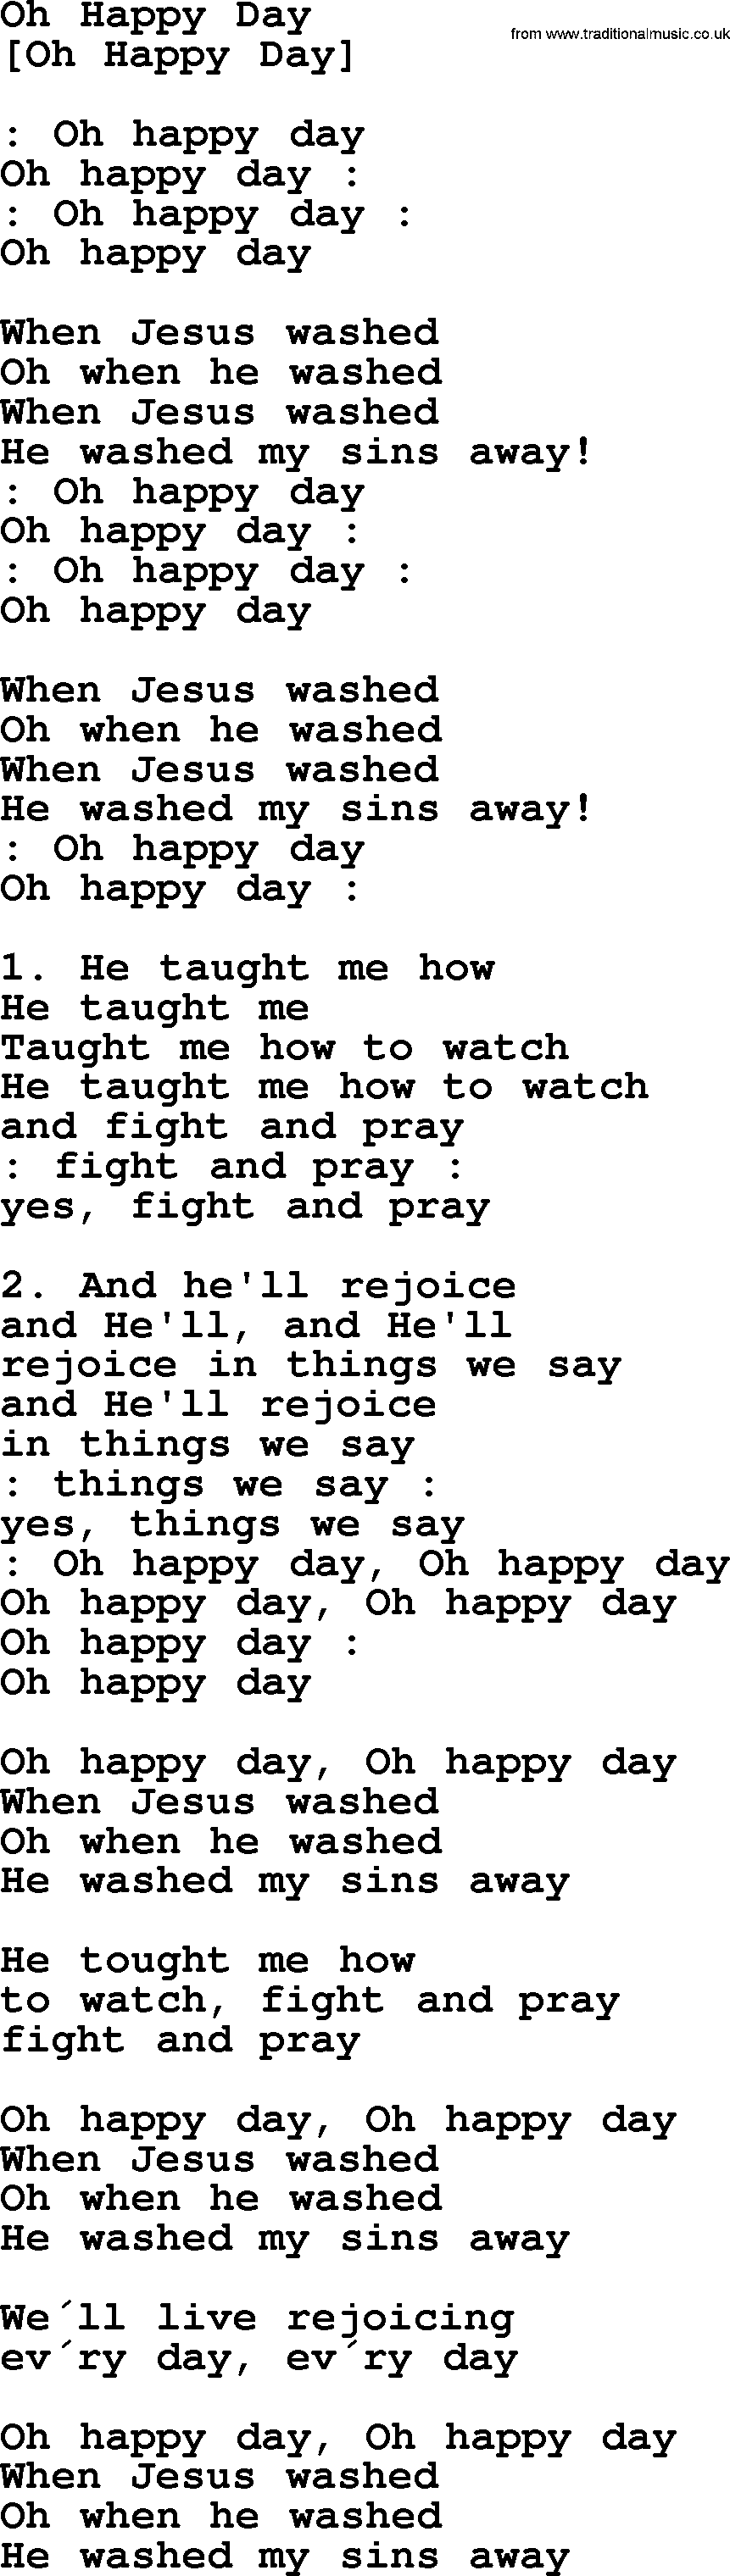 Old American Song: Oh Happy Day, lyrics